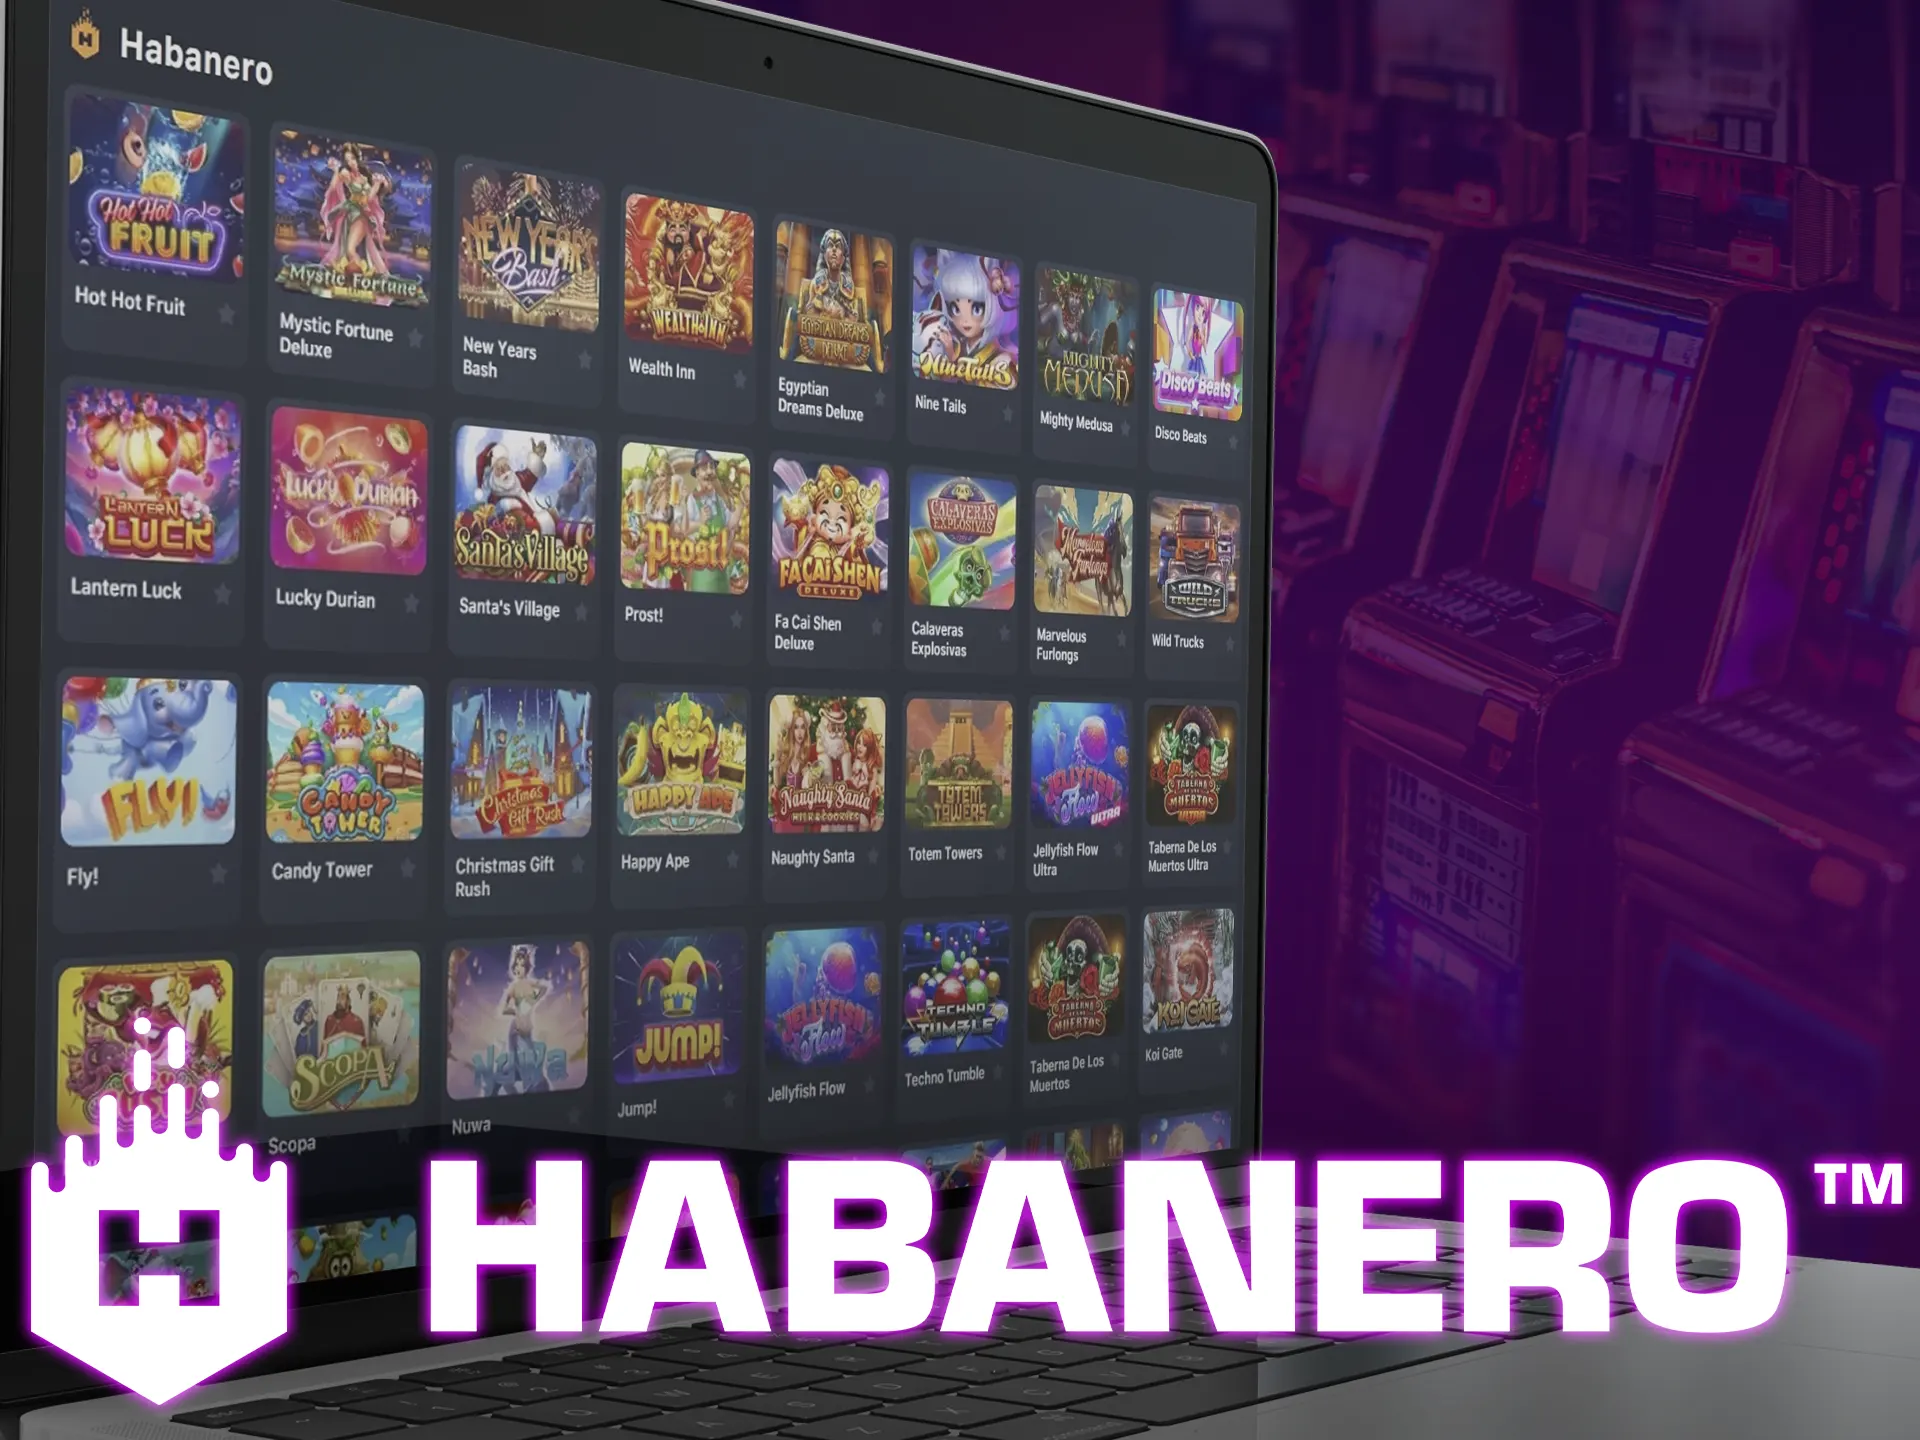 Habanero a modern gaming provider offers high-quality games, including slots.